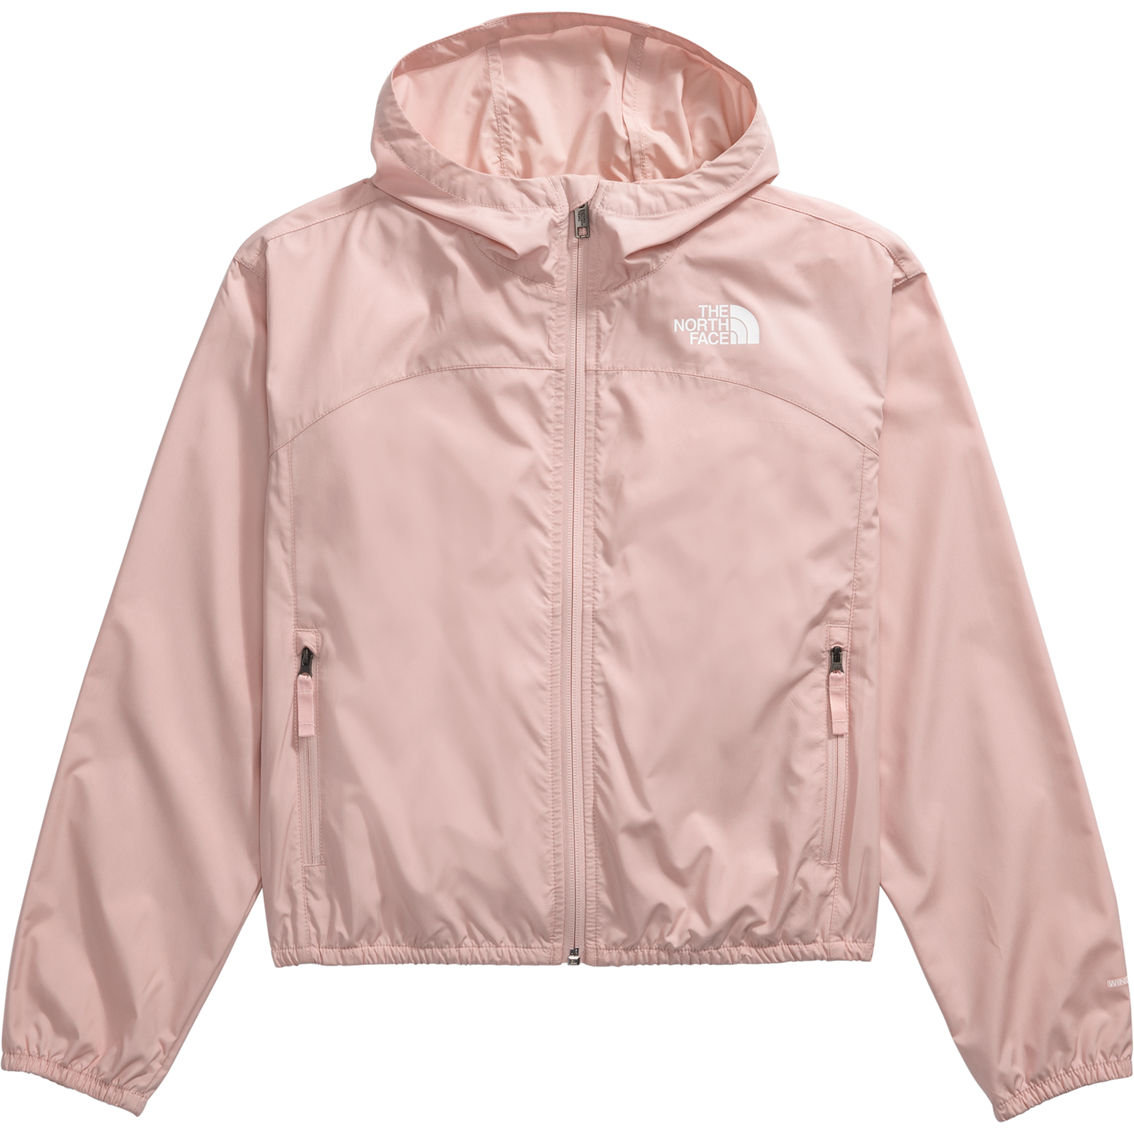 The North Face Girls Never Stop Hooded Windwall Jacket - Image 6 of 6